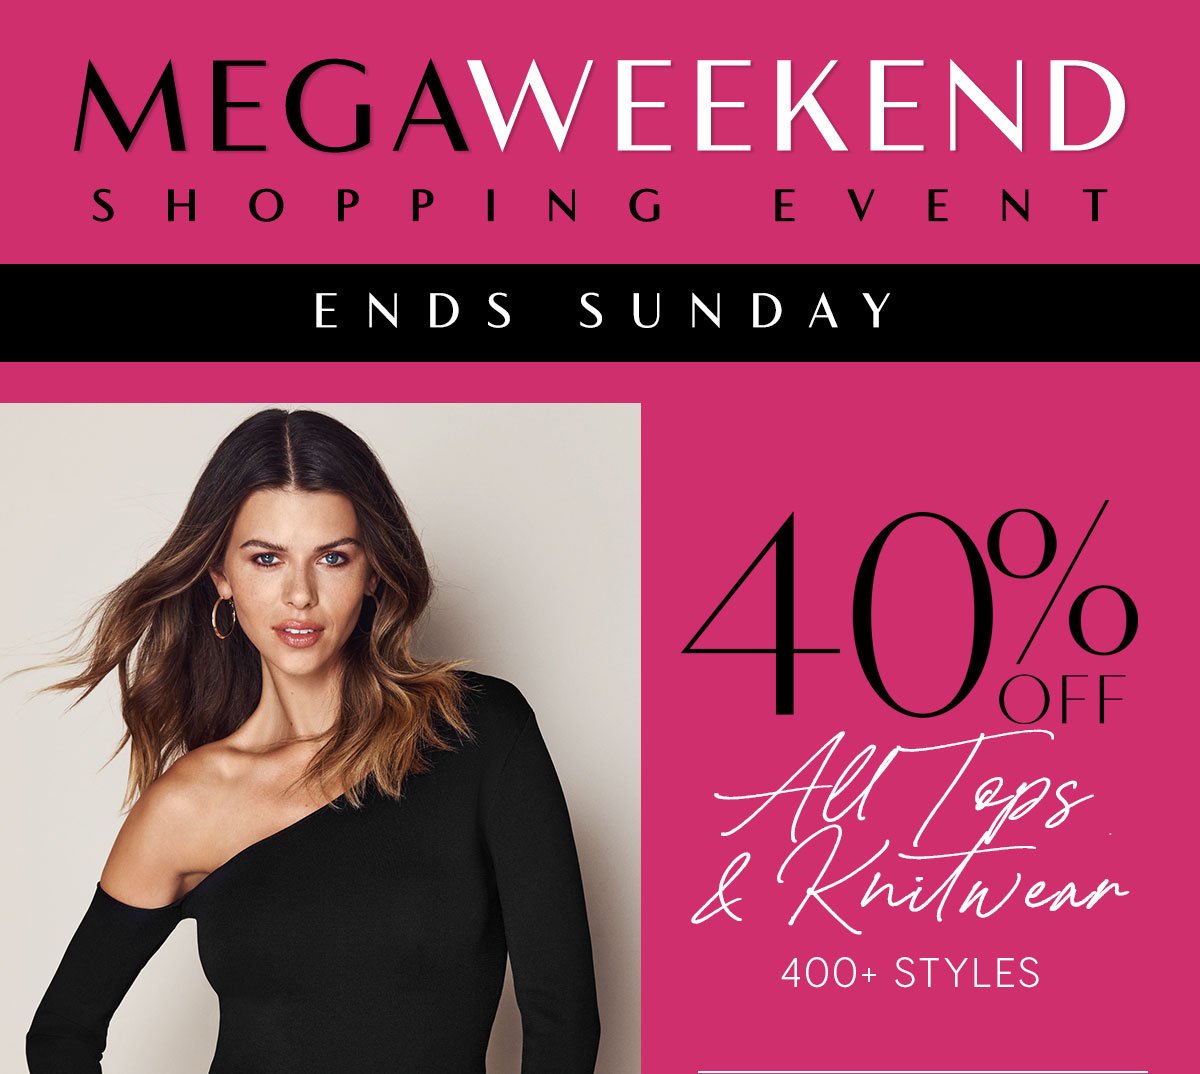 Mega Weekend Shopping Event. 40% Off All Tops & Knitwear.